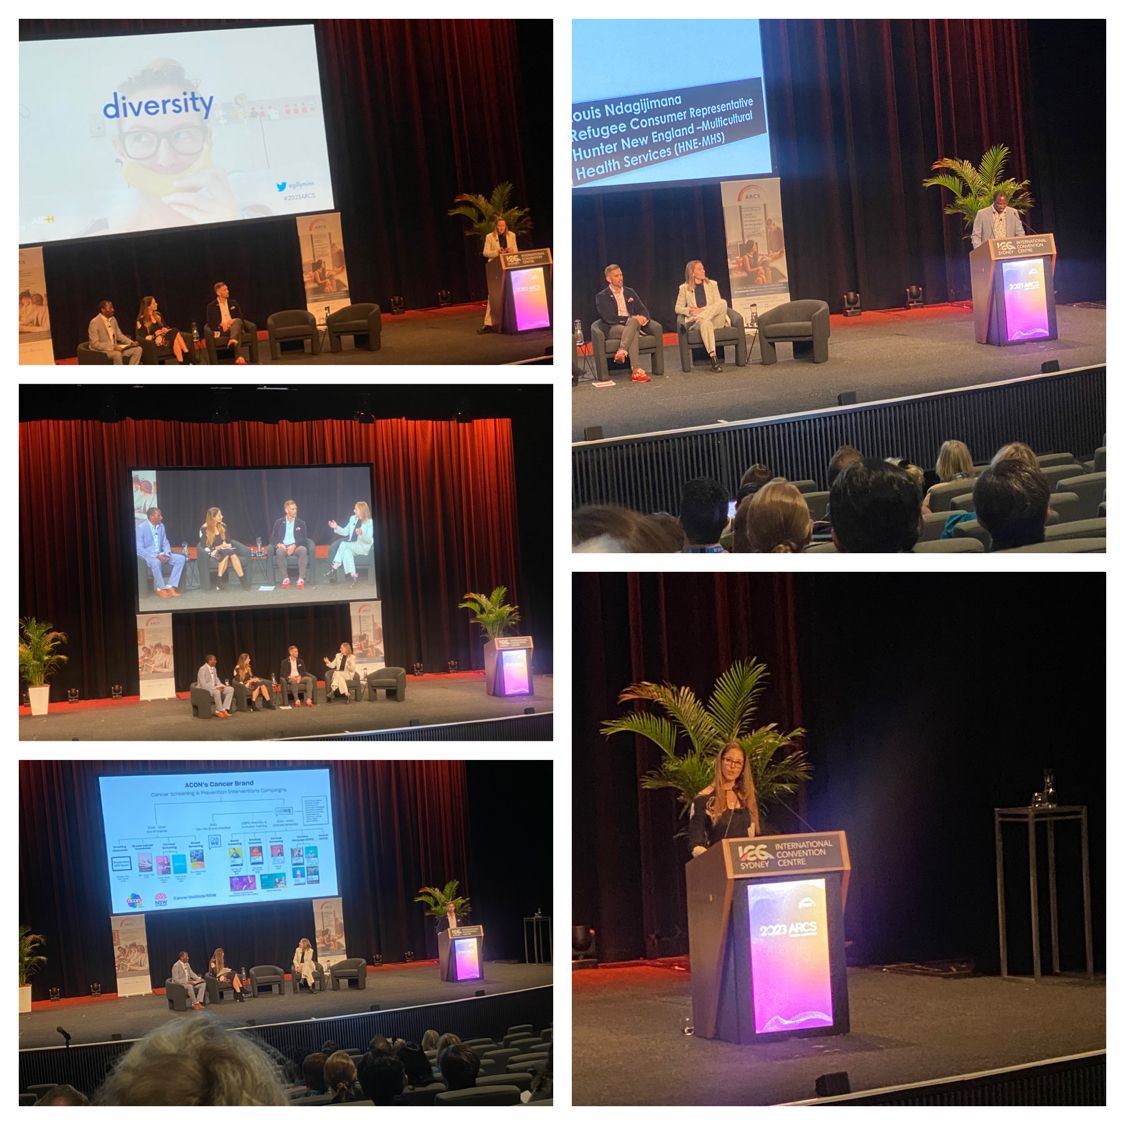 We've hope you've been enjoying our morning plenary sessions! Yesterday we explored the question, do we need a new approach to regulatory decisions for emerging technologies across the product life cycle? and this morning we delved into inclusion, diversity and equity.